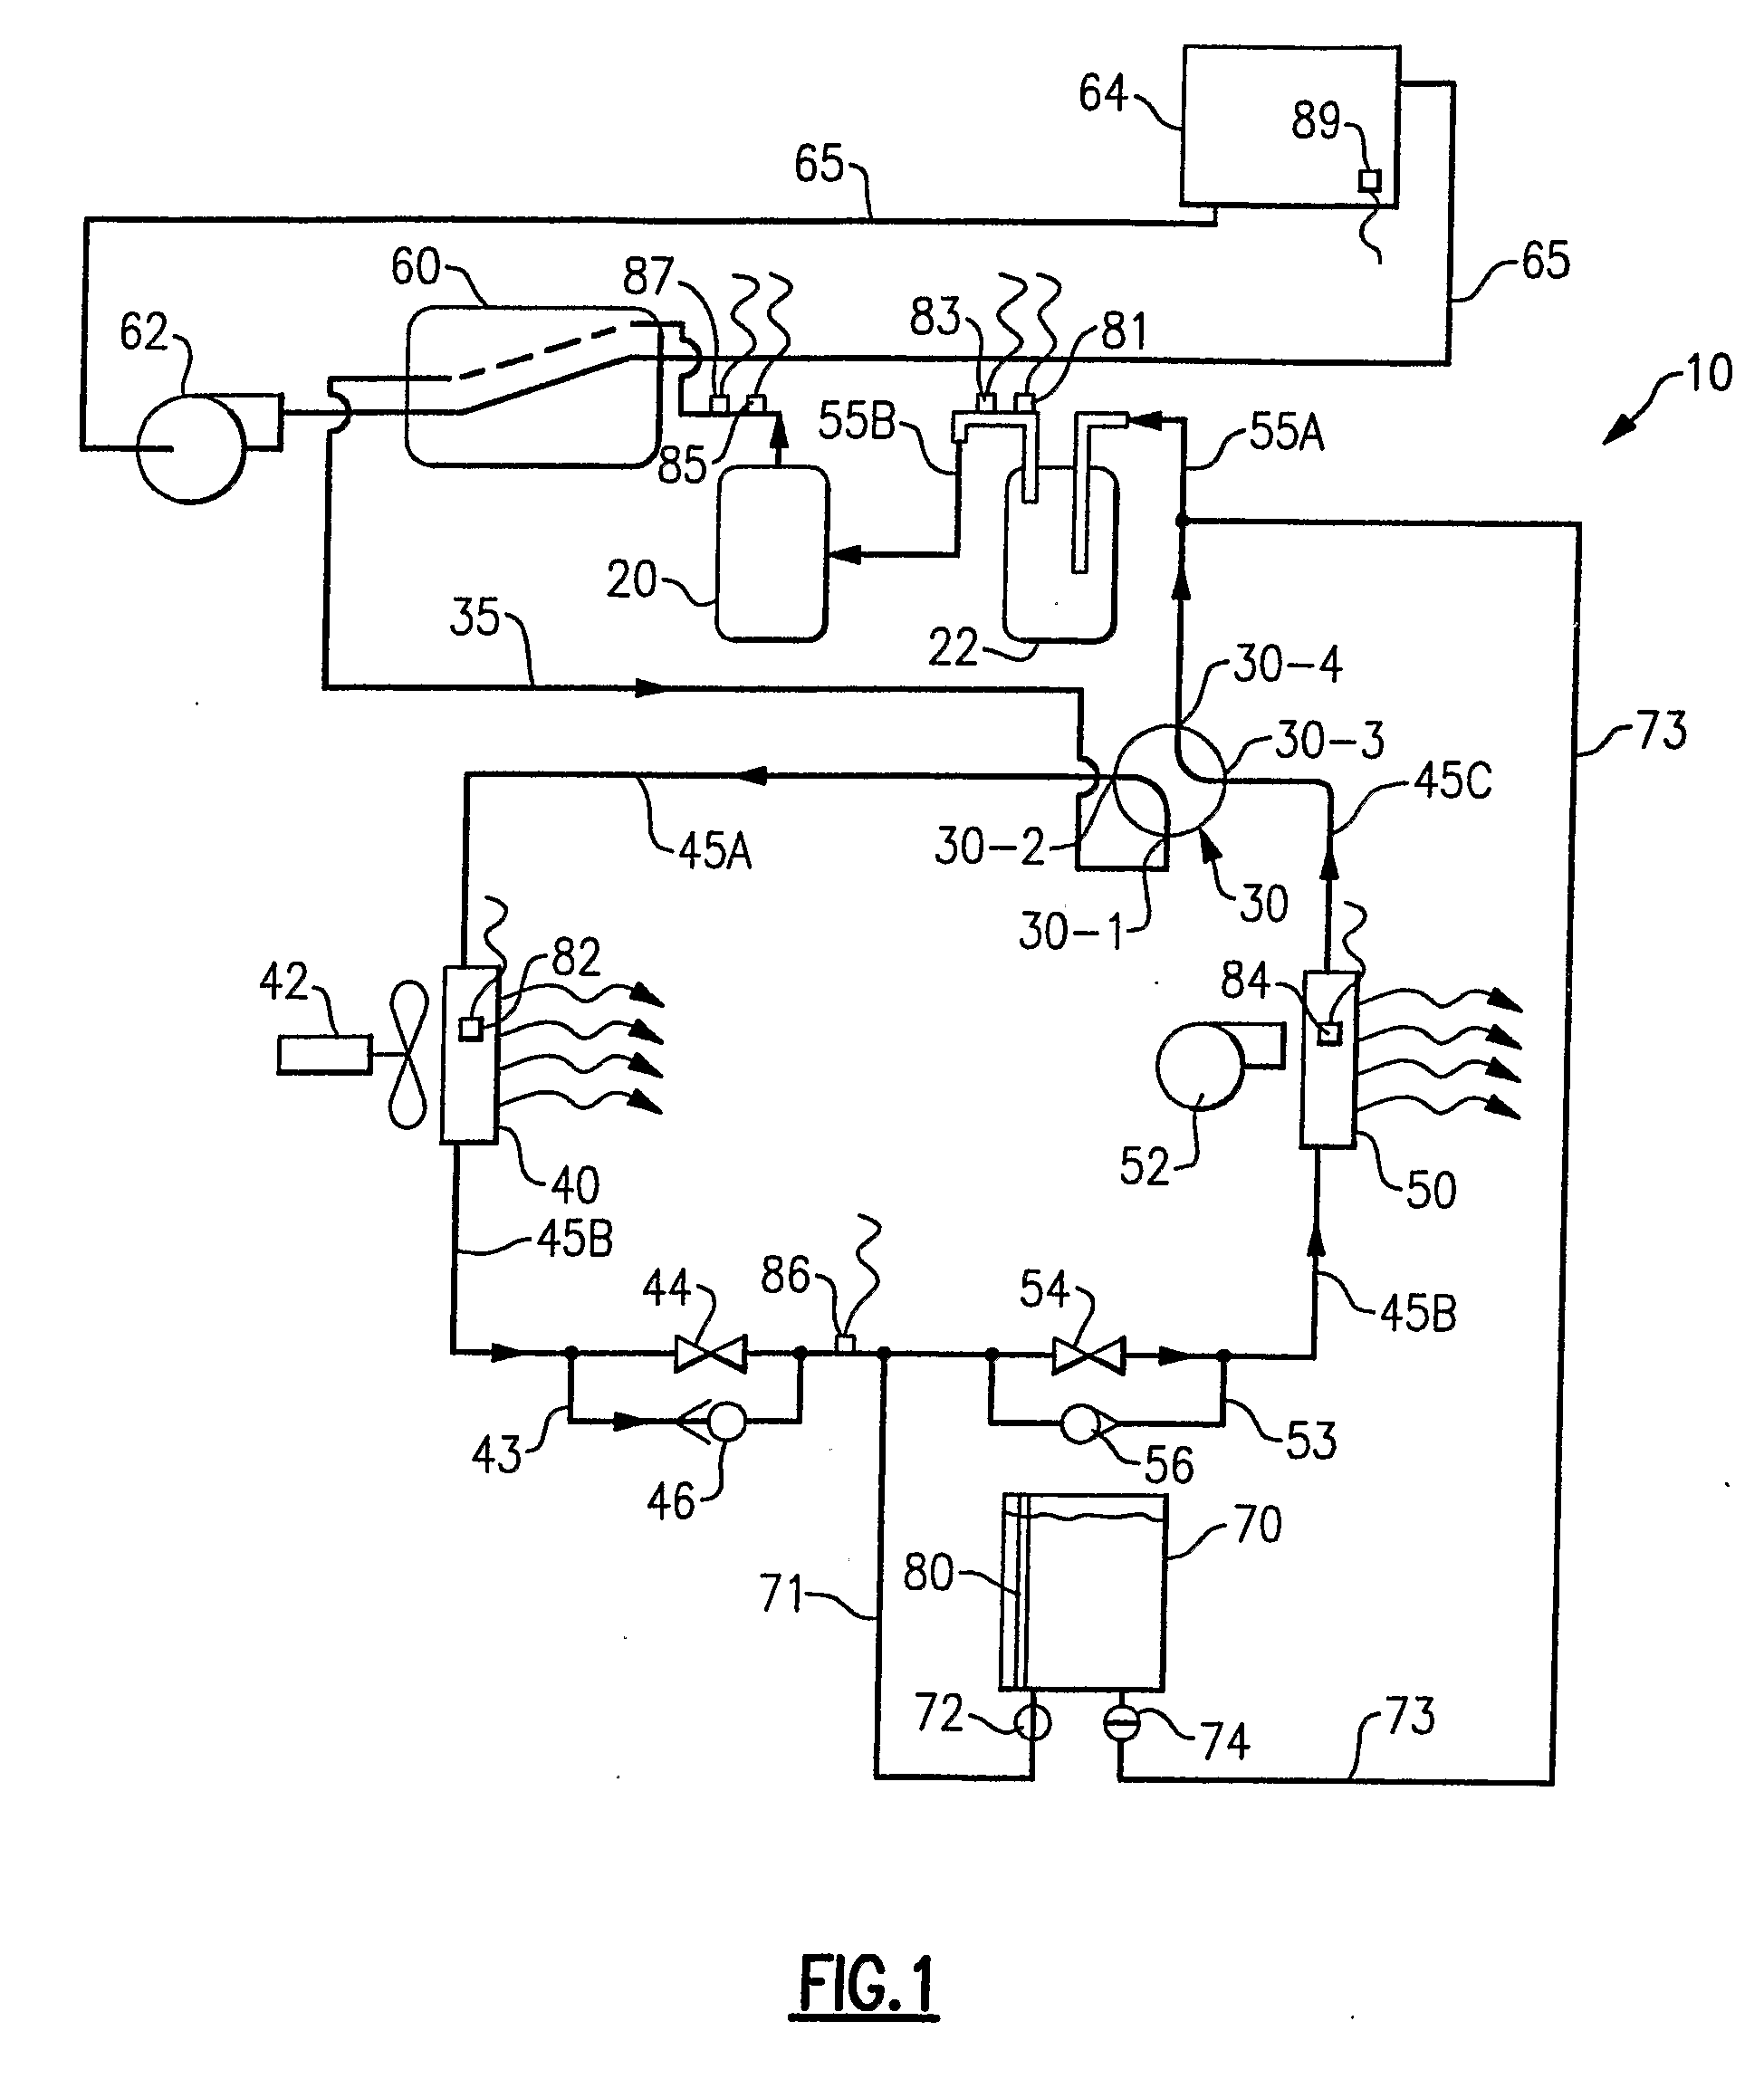 Heat Pump System with Auxiliary Water Heating